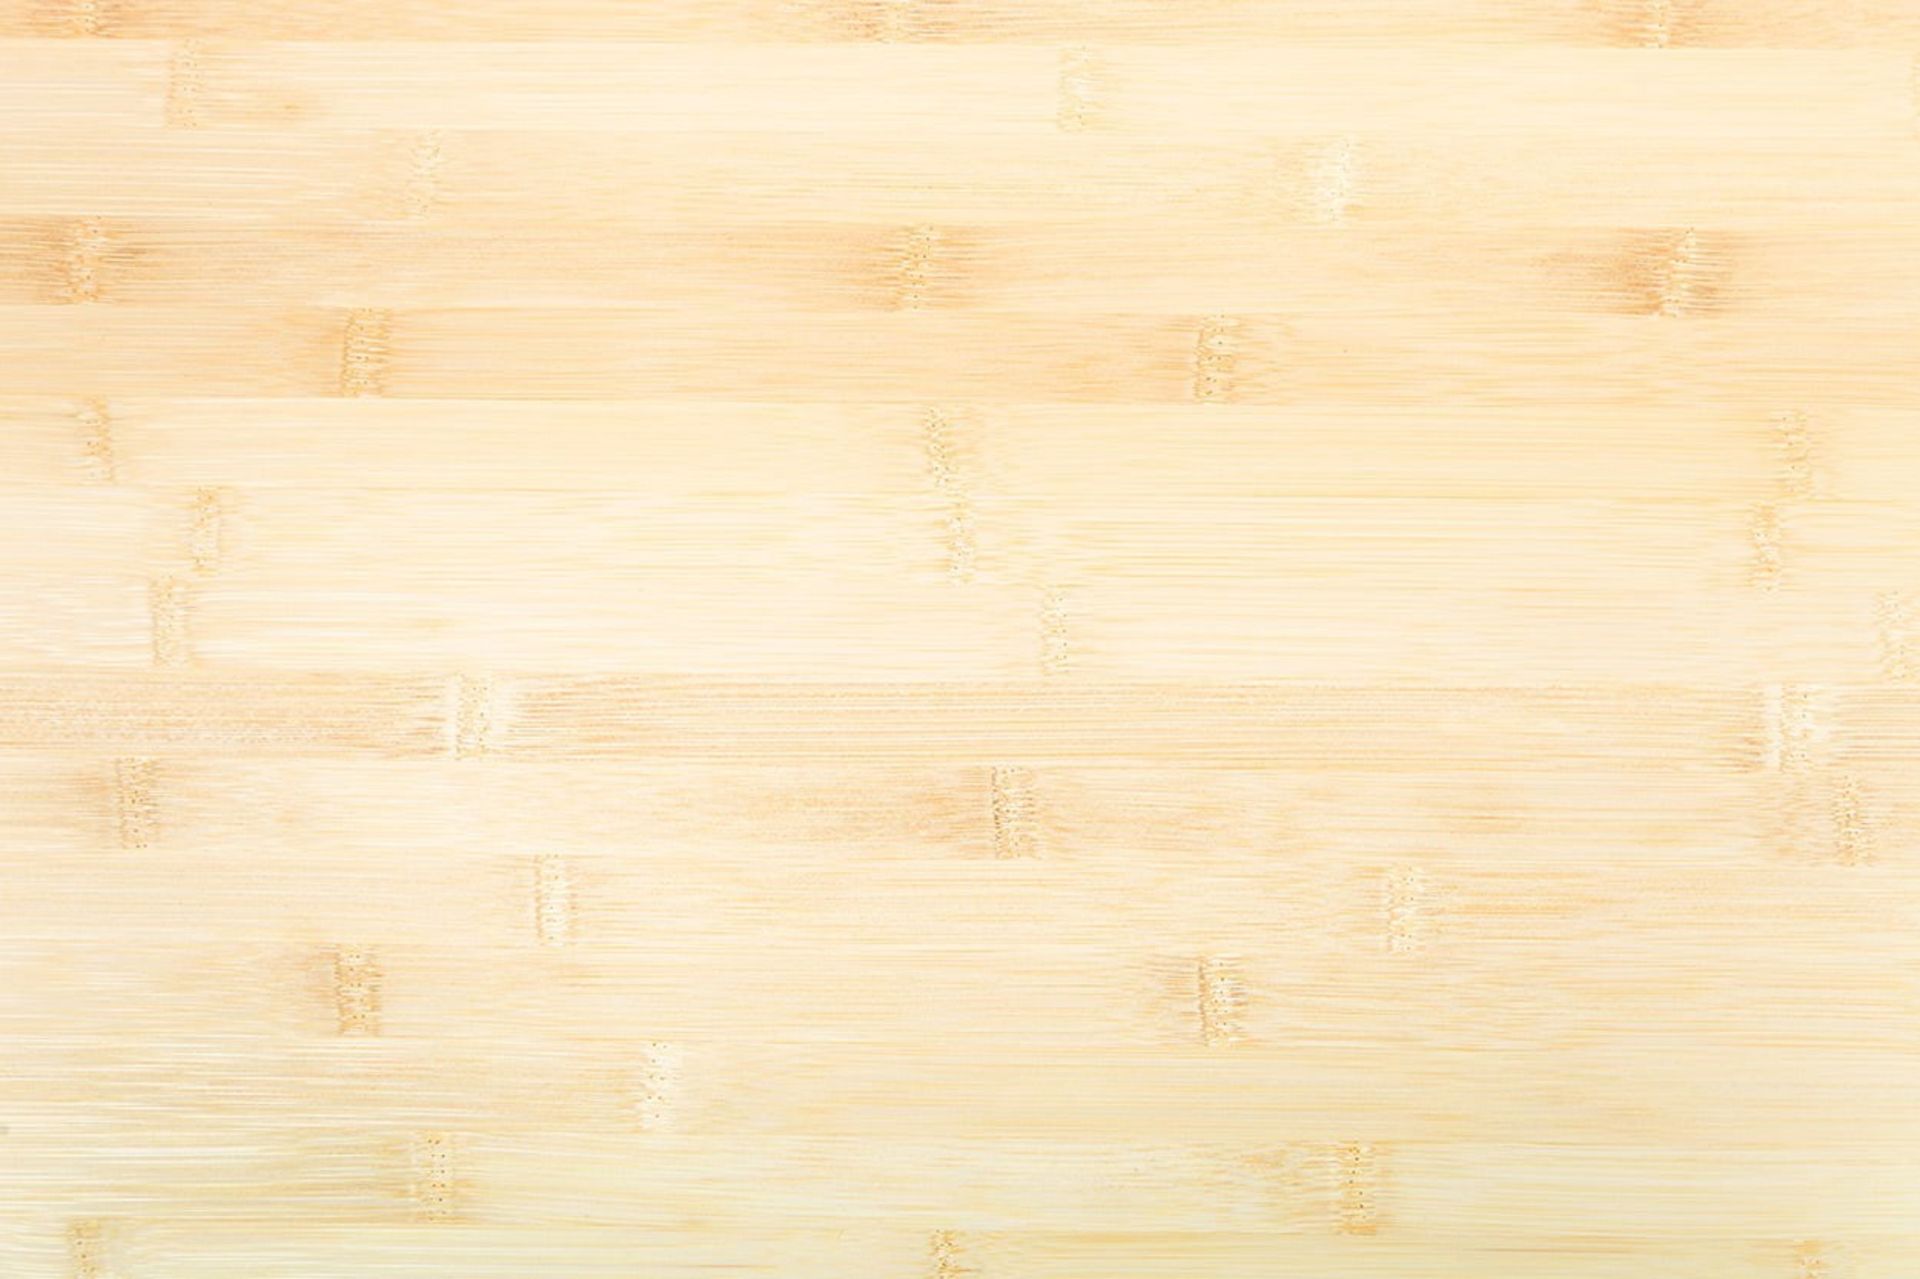 1 x Layered Solid Bamboo Wood Worktop - Size: 3000 x 650 x 40mm - Ideal For Kitchens, Countertops, - Image 2 of 4